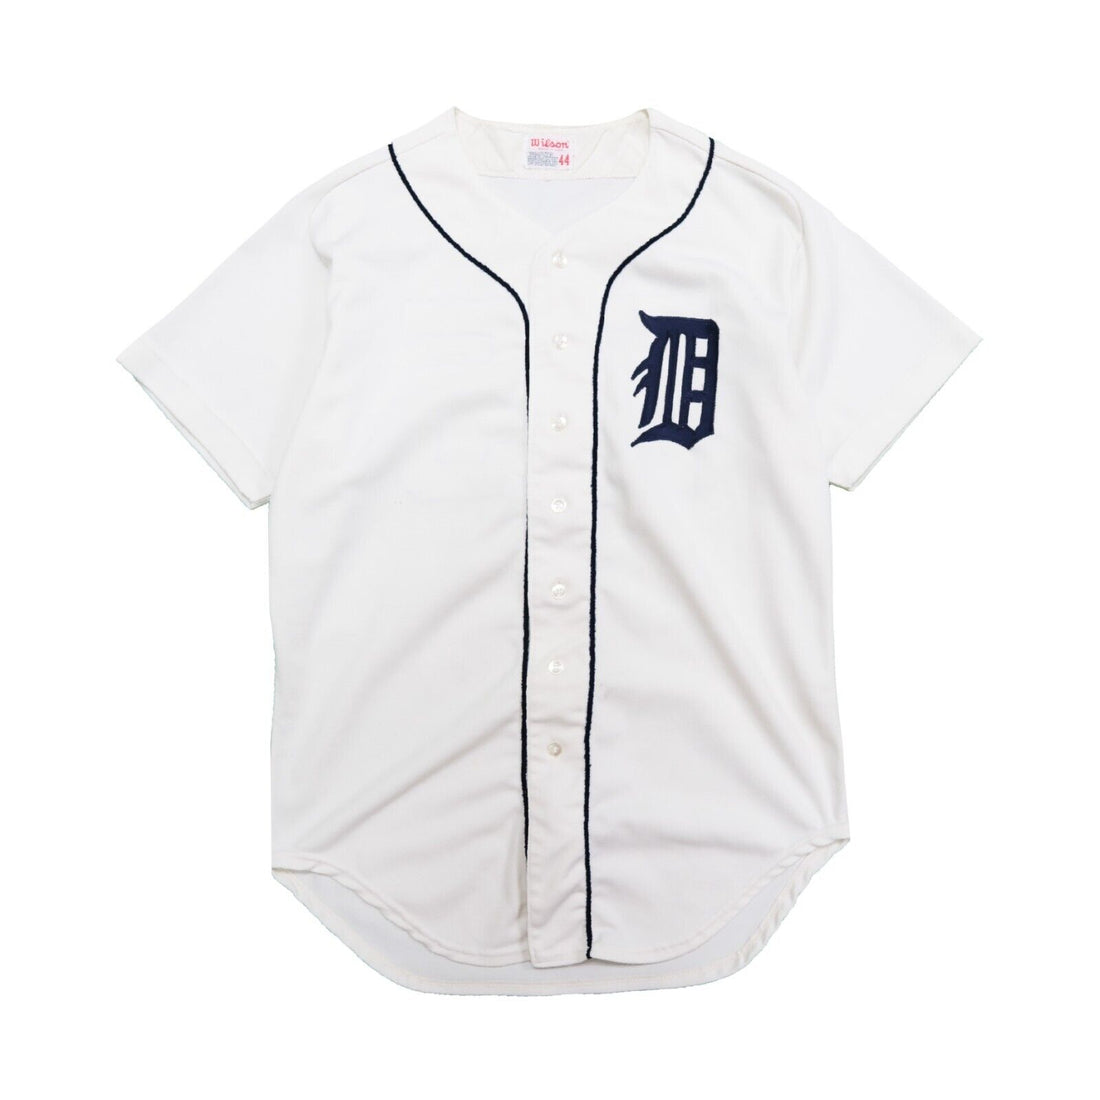 Vintage Detroit Tigers Authentic Wilson Jersey Size 44 White MLB